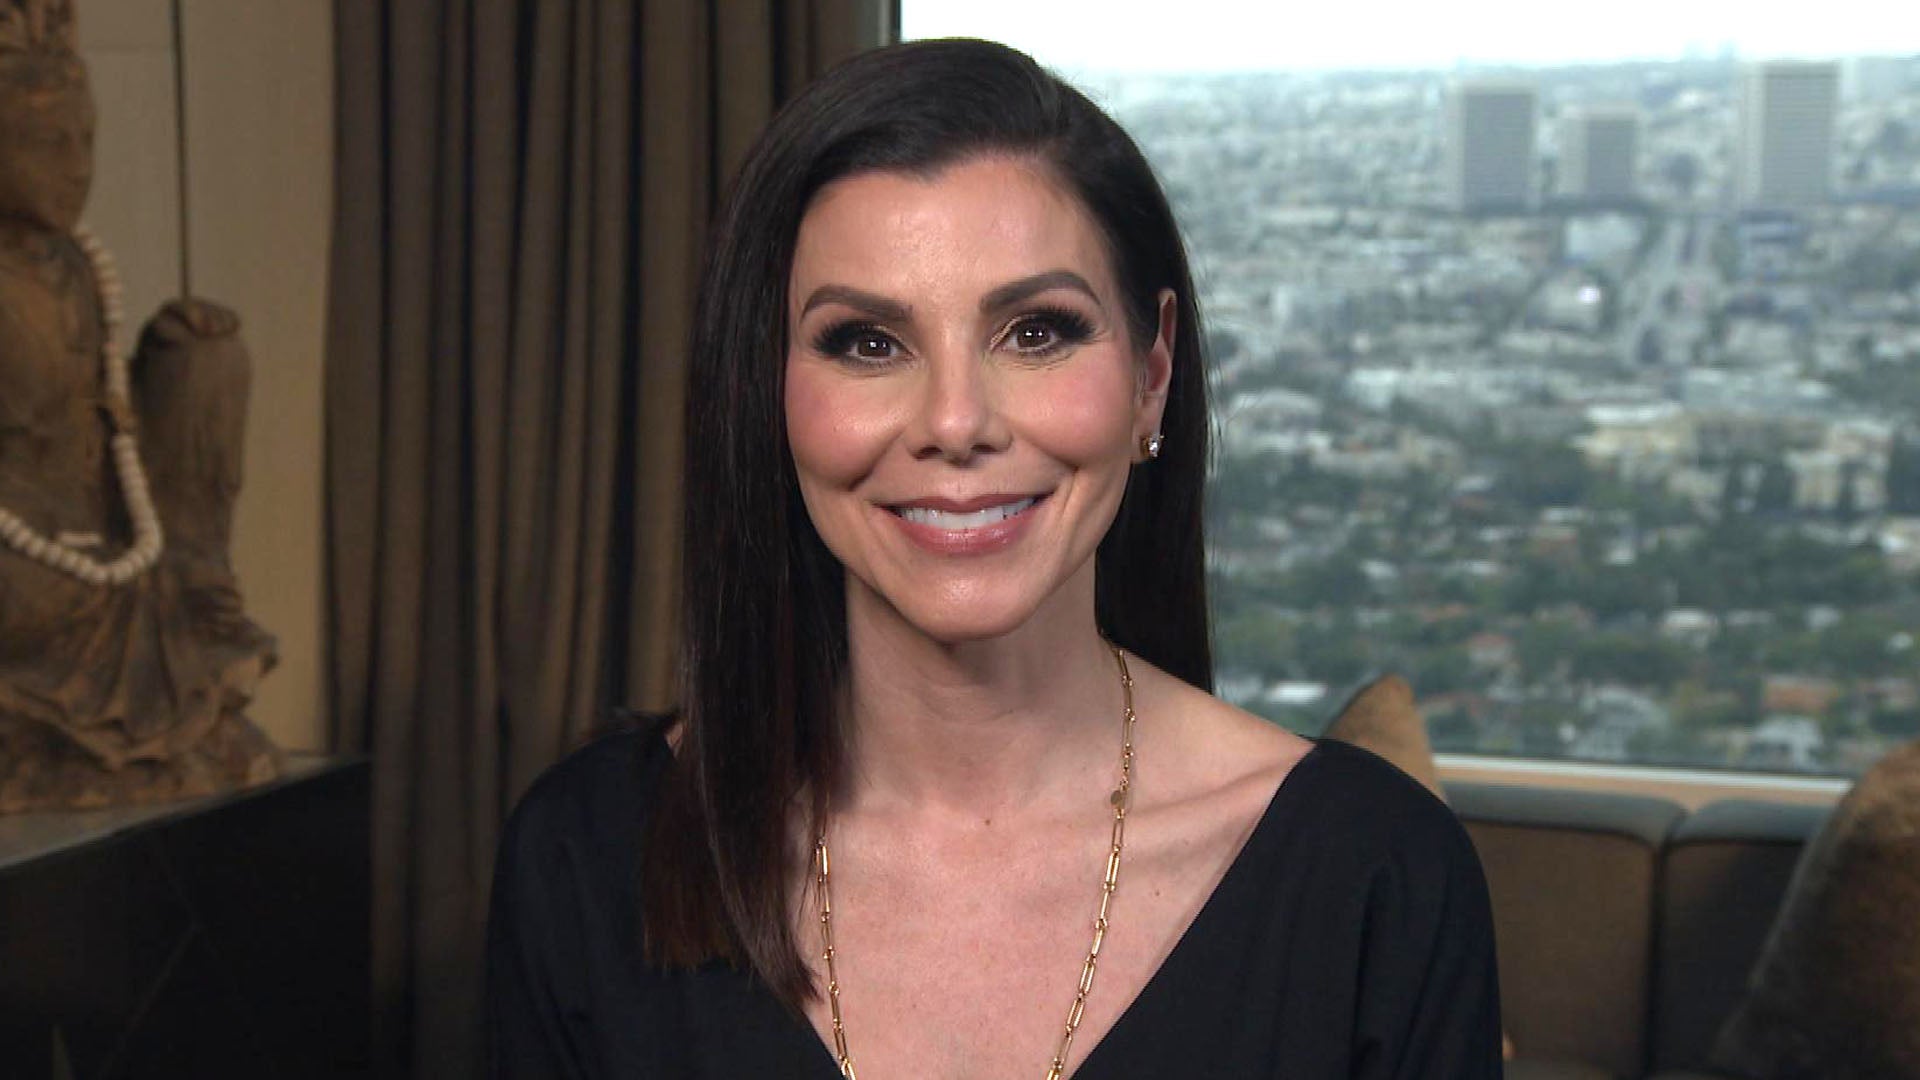 'RHOC's Heather Dubrow Reflects on 'Very Tough' Season 17 That Left Her With 'PTSD' (Exclusive)